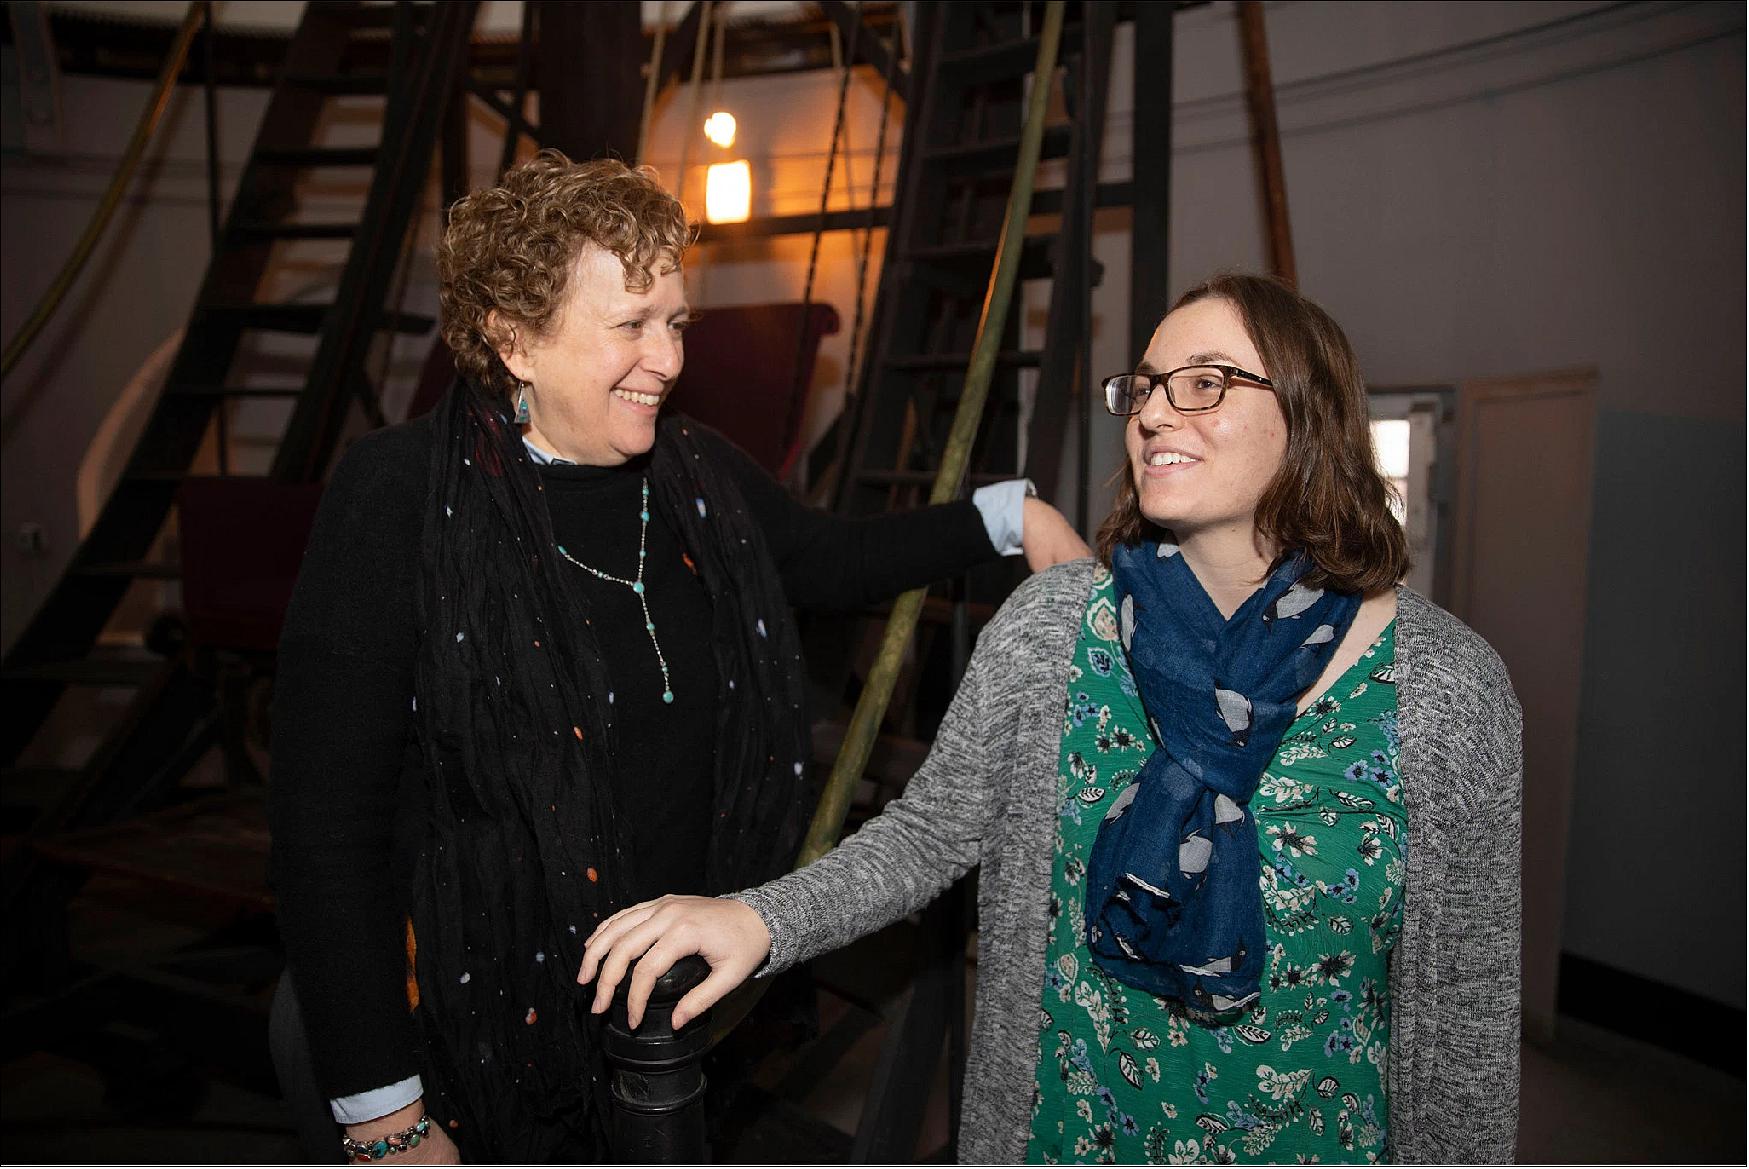 Figure 80: "No astronomer expected that we live next to a giant, wave-like collection of gas — or that it forms the local arm of the Milky Way," said Harvard Professor Alyssa Goodman (left), standing with graduate student Catherine Zucker, a key member of the team (image credit: Kris Snibbe/Harvard Staff Photographer)